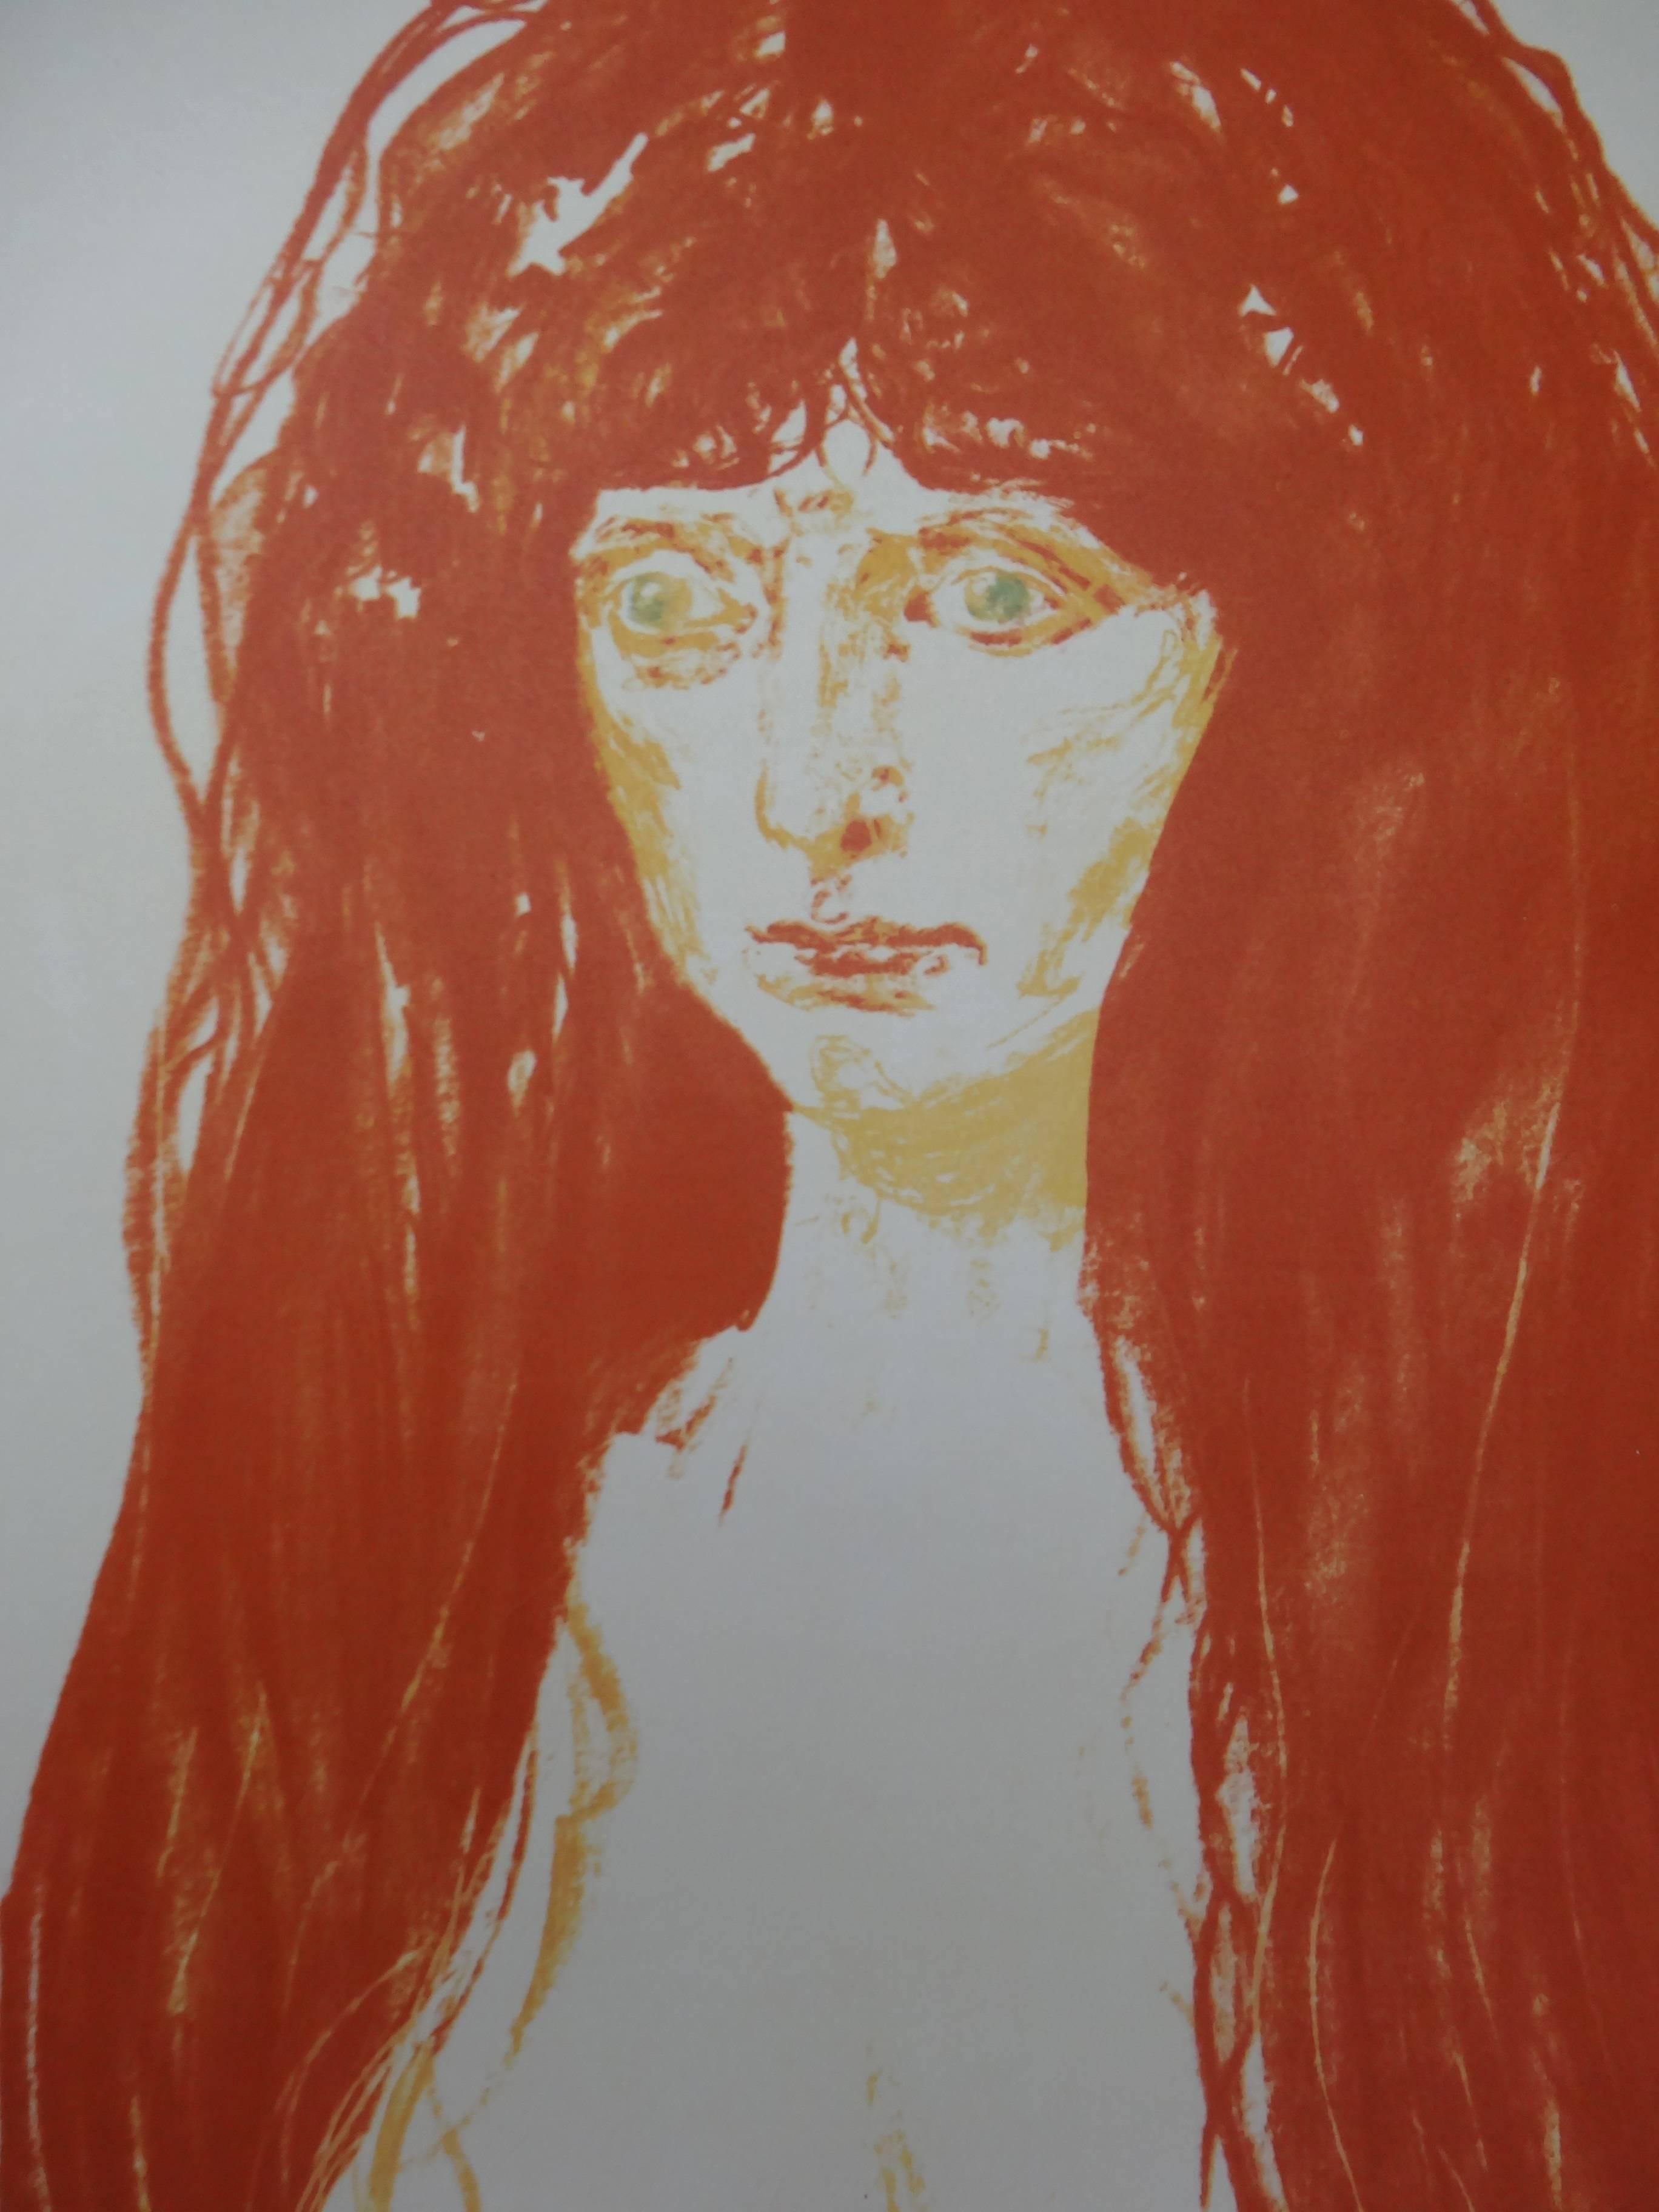 Redhead Woman - Lithograph Exhibition Poster #Los Angeles County Museum #MOURLOT - Gray Portrait Print by Edvard Munch